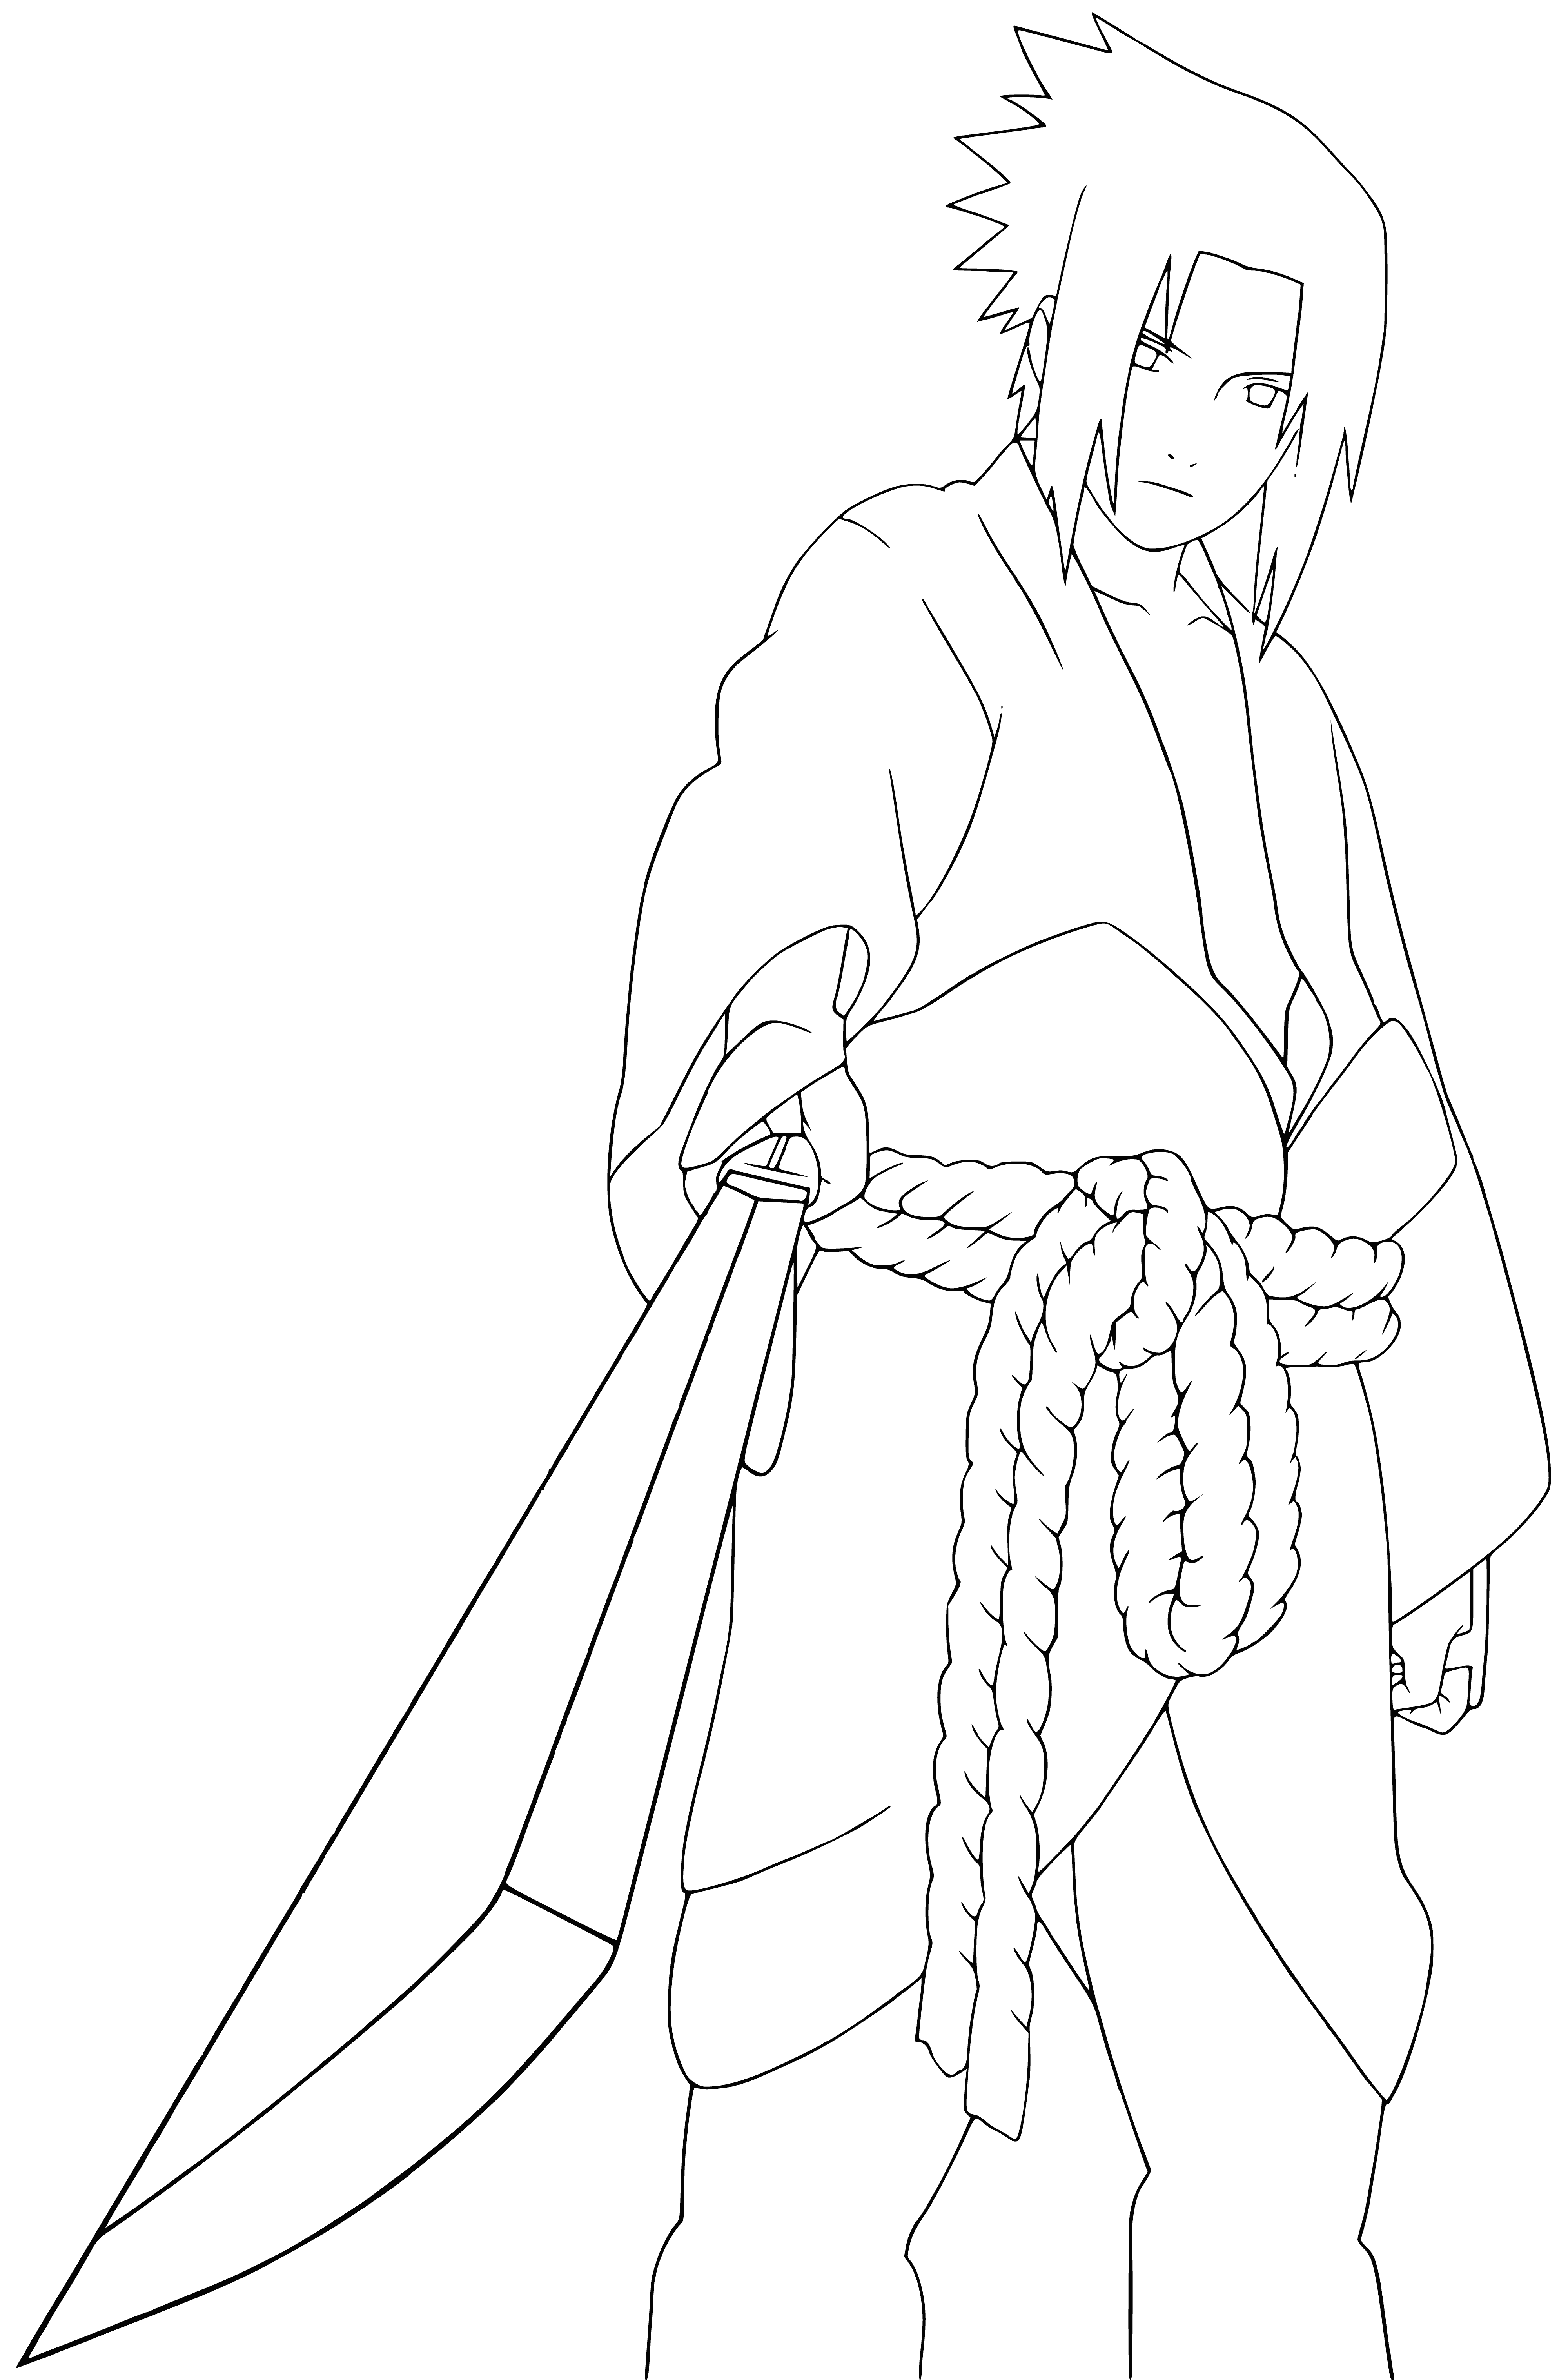 coloring page: Sasuke is a young man with black hair, dark eyes, and a blue/white uniform w/Uchiha clan crest. He carries a sword & wears a black headband w/a metal plate.